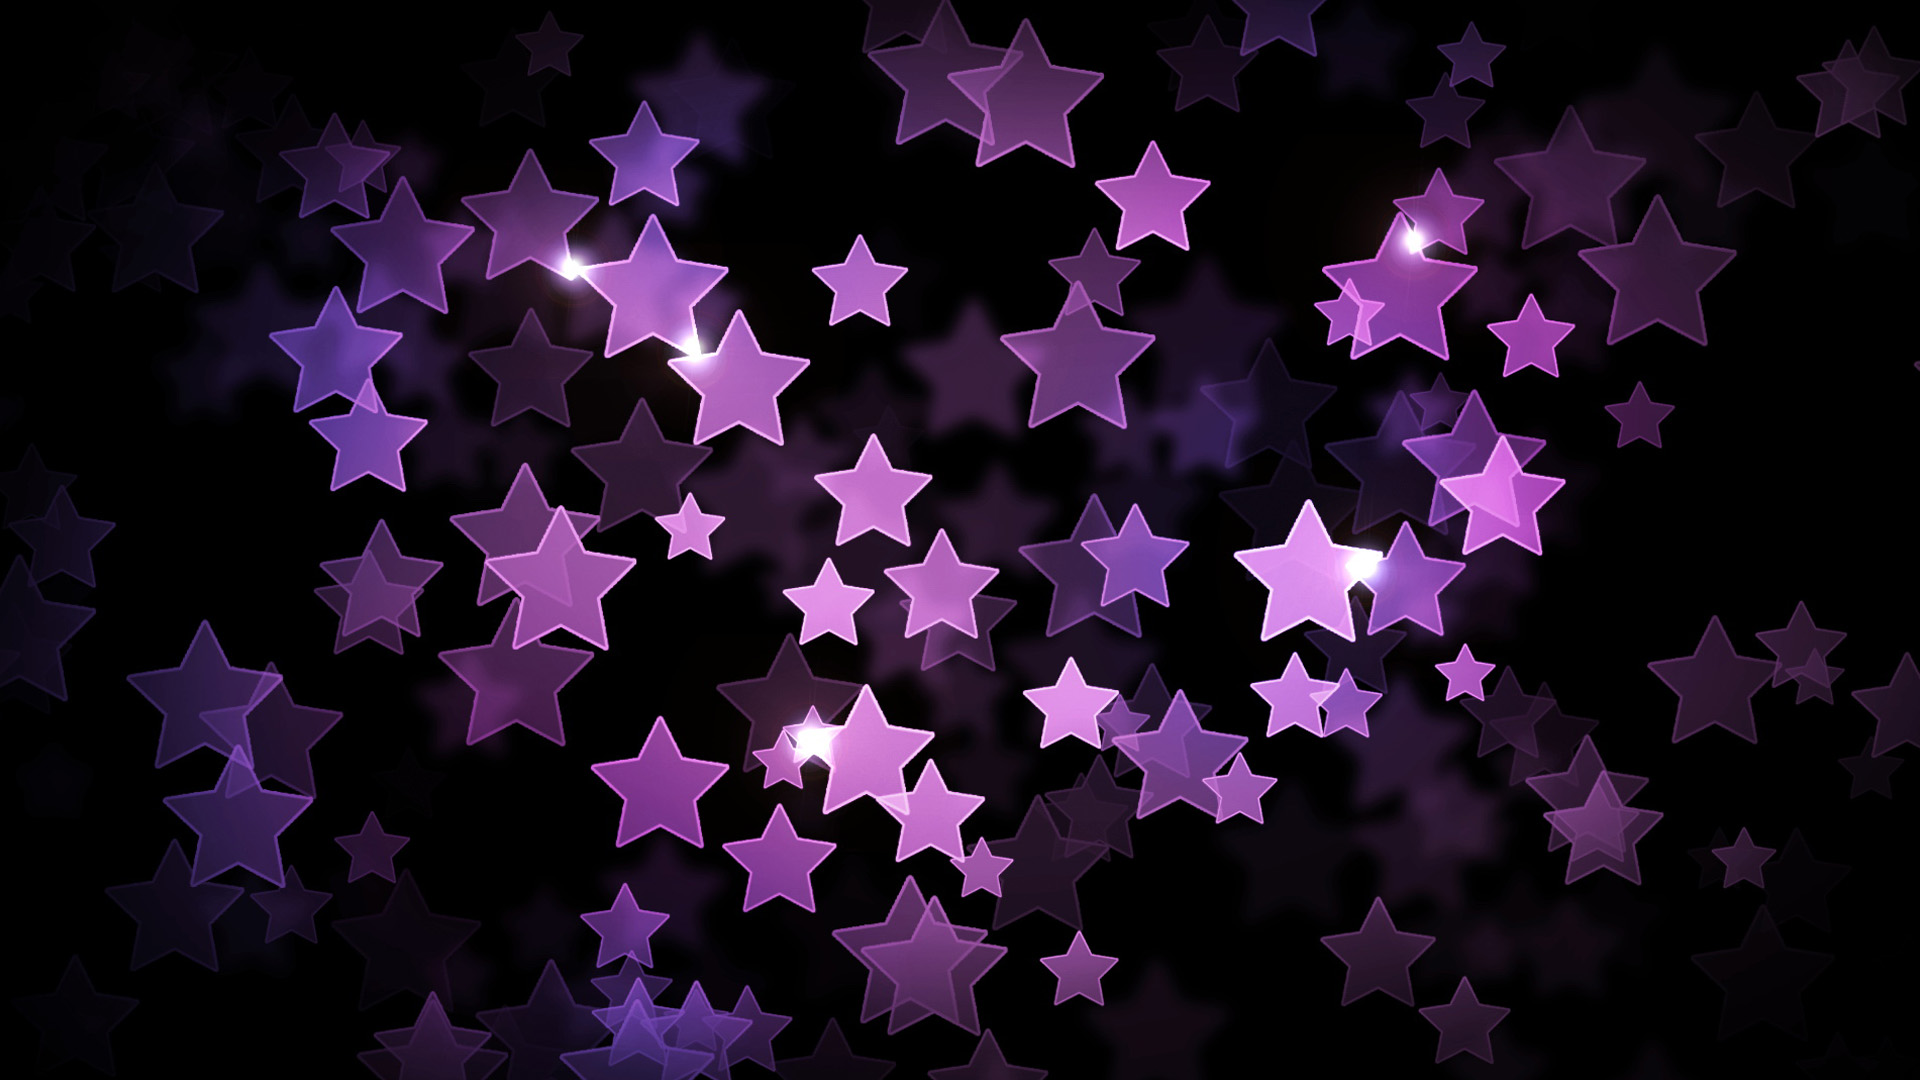 Abstract stars Wallpapers, Green Backgrounds, Pictures and images